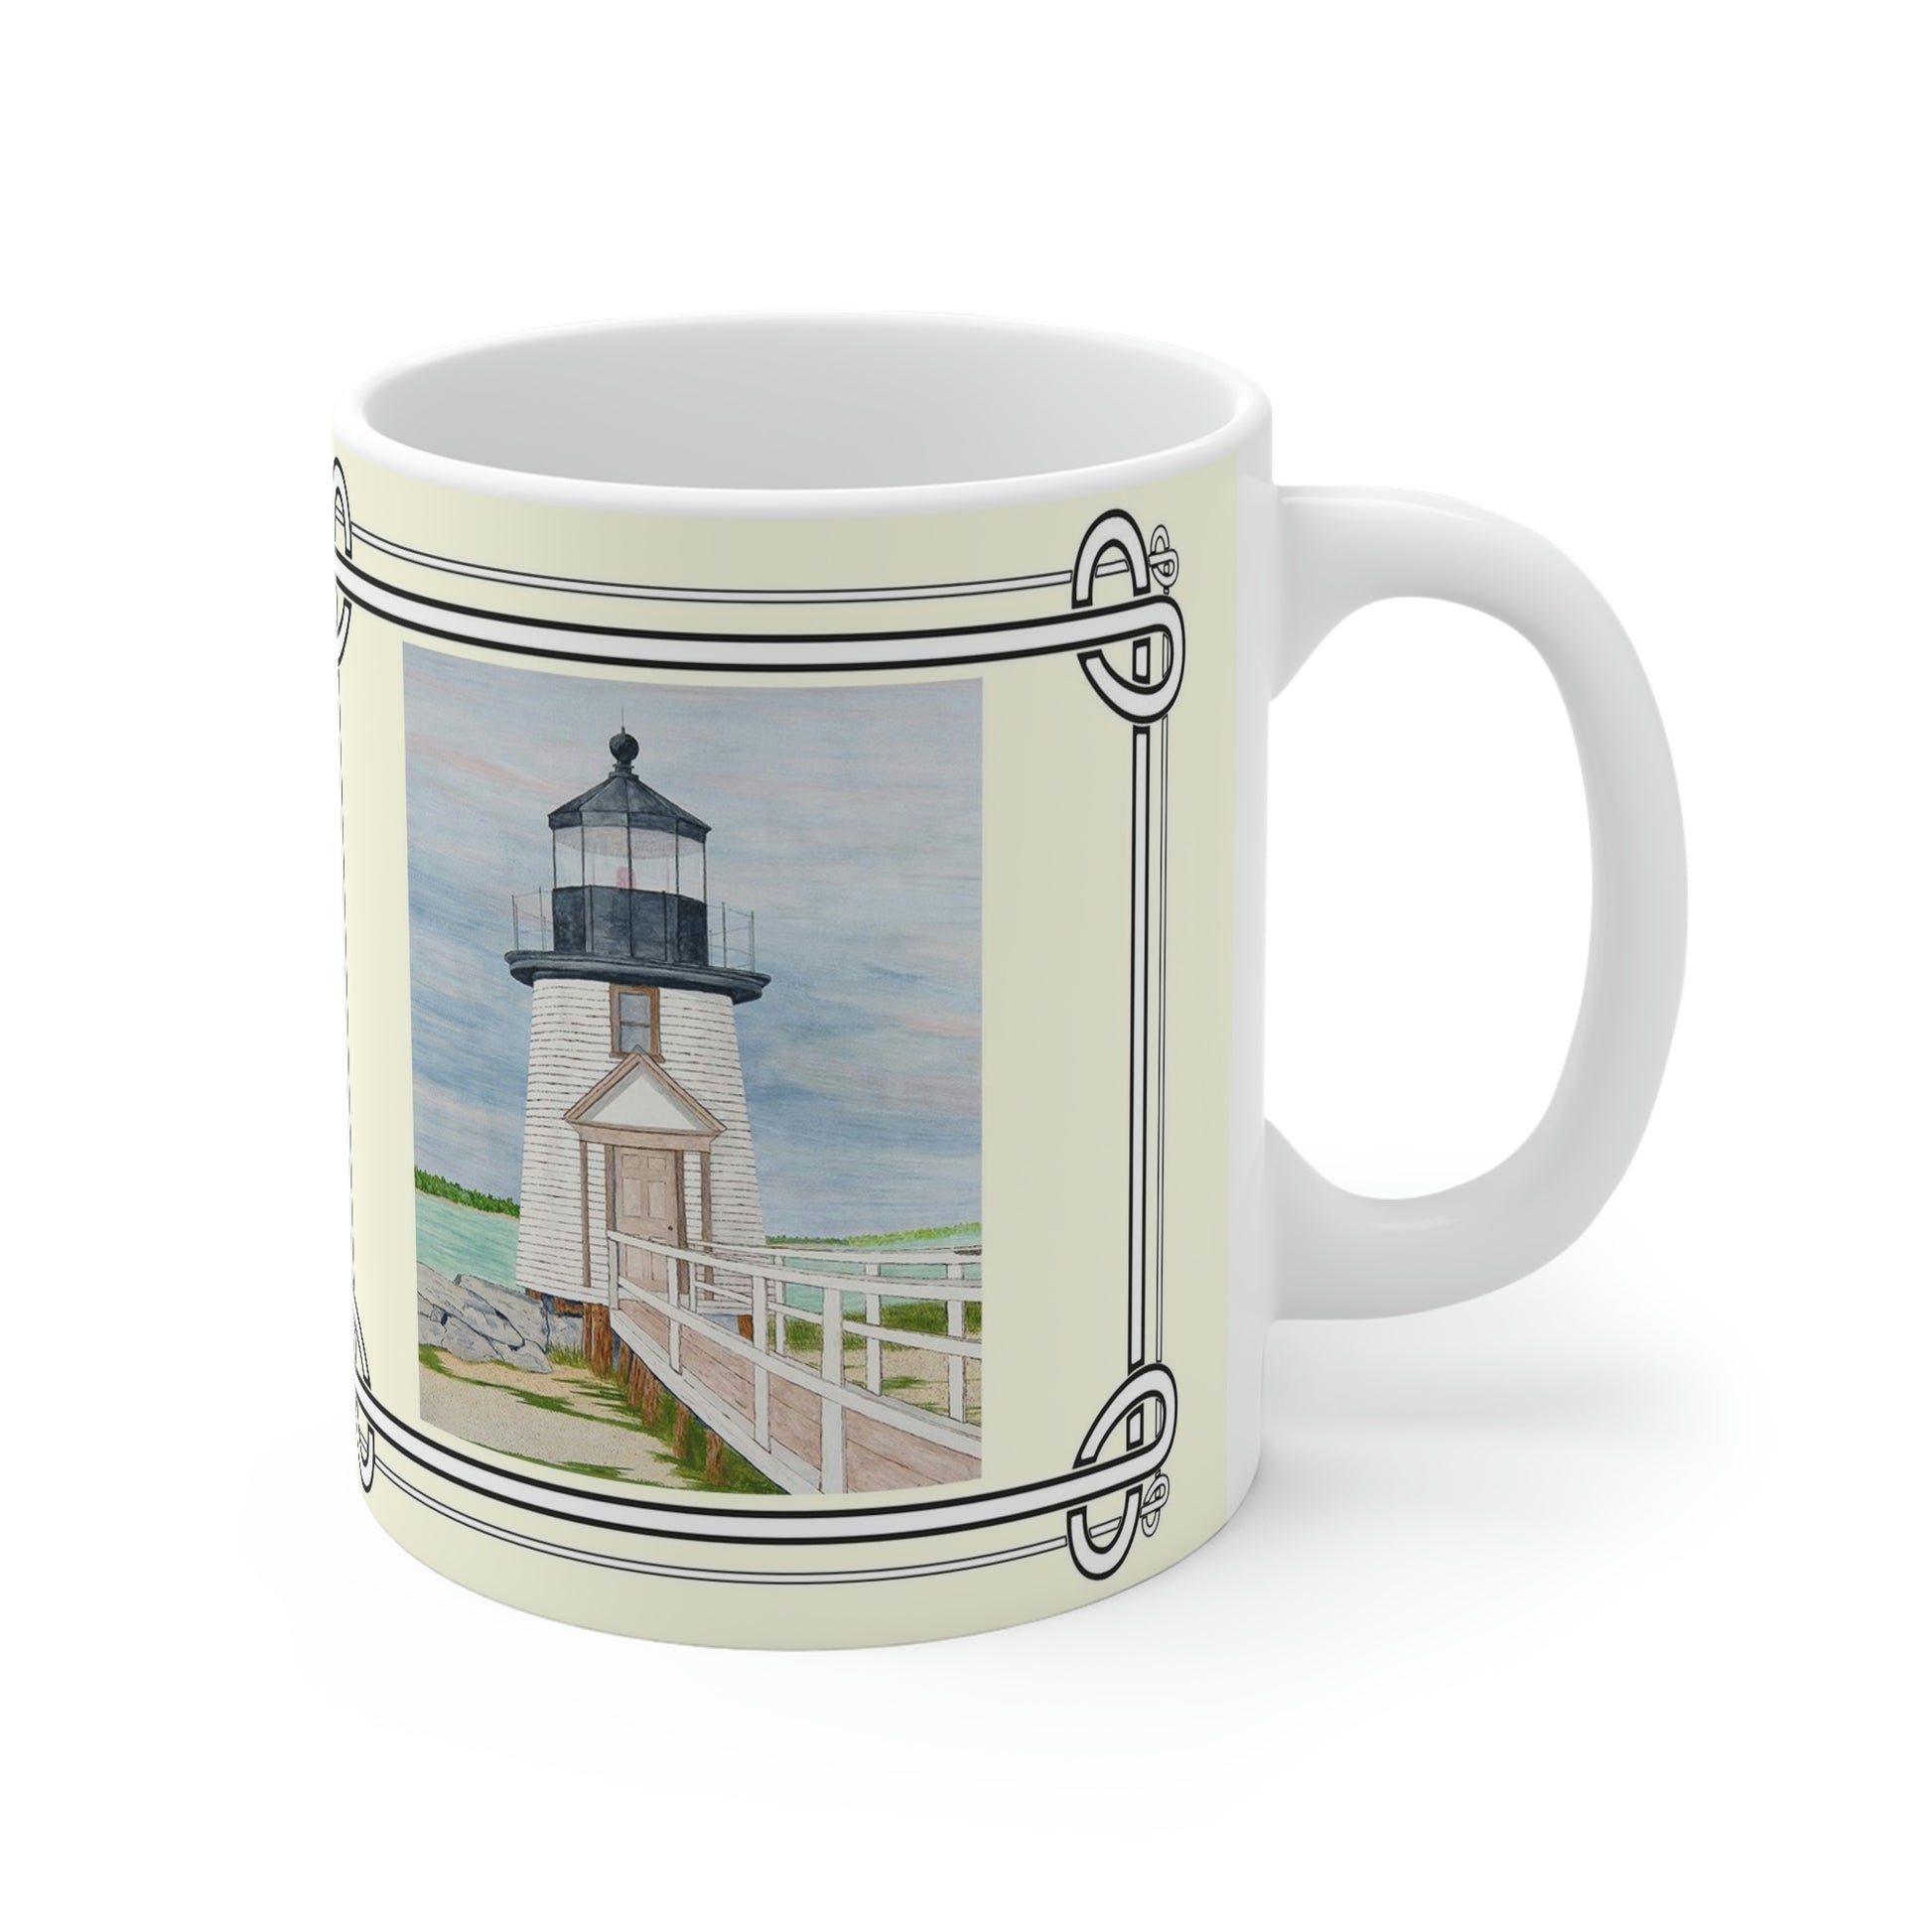 In the evening light, this proud sentinel of the sea bids welcome to homebound sailors, and welcomes ferry passengers to Nantucket's many charms. This lovely and well-known lihghthouse on Nantucket Island, Massachusetts was first built in 1746